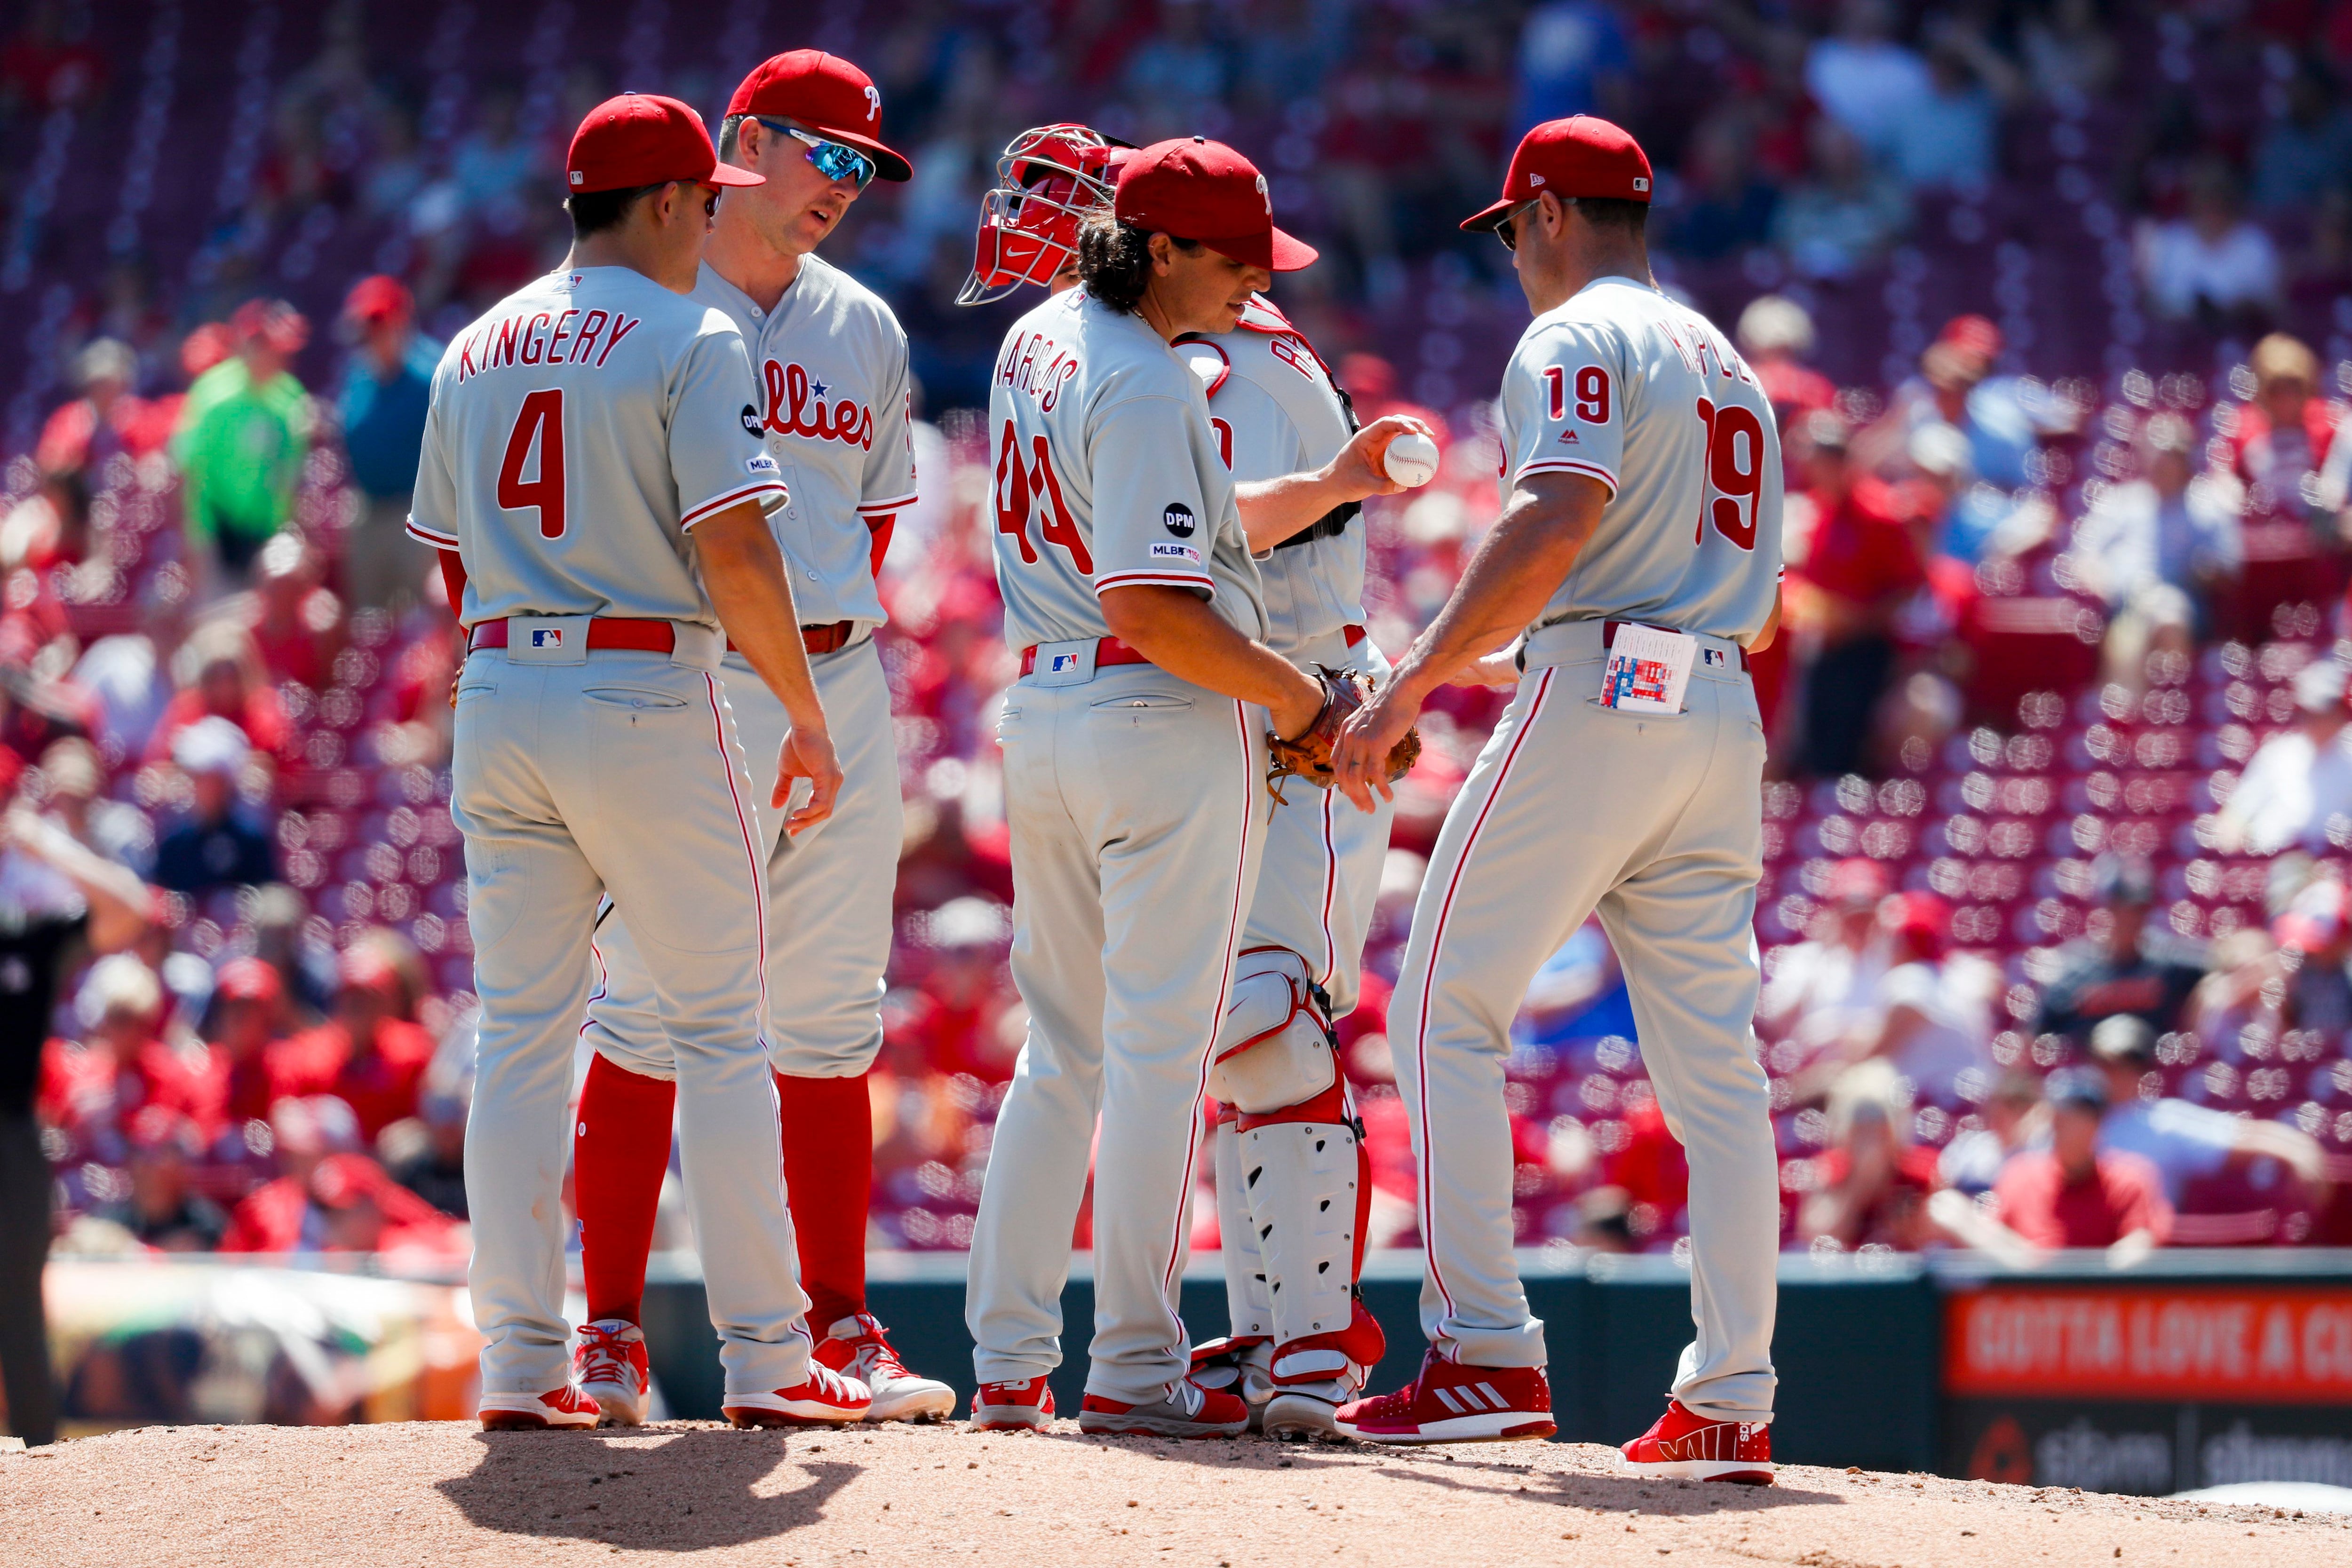 Cincinnati Reds' playoff hopes take another hit in 4-3 loss to Cards